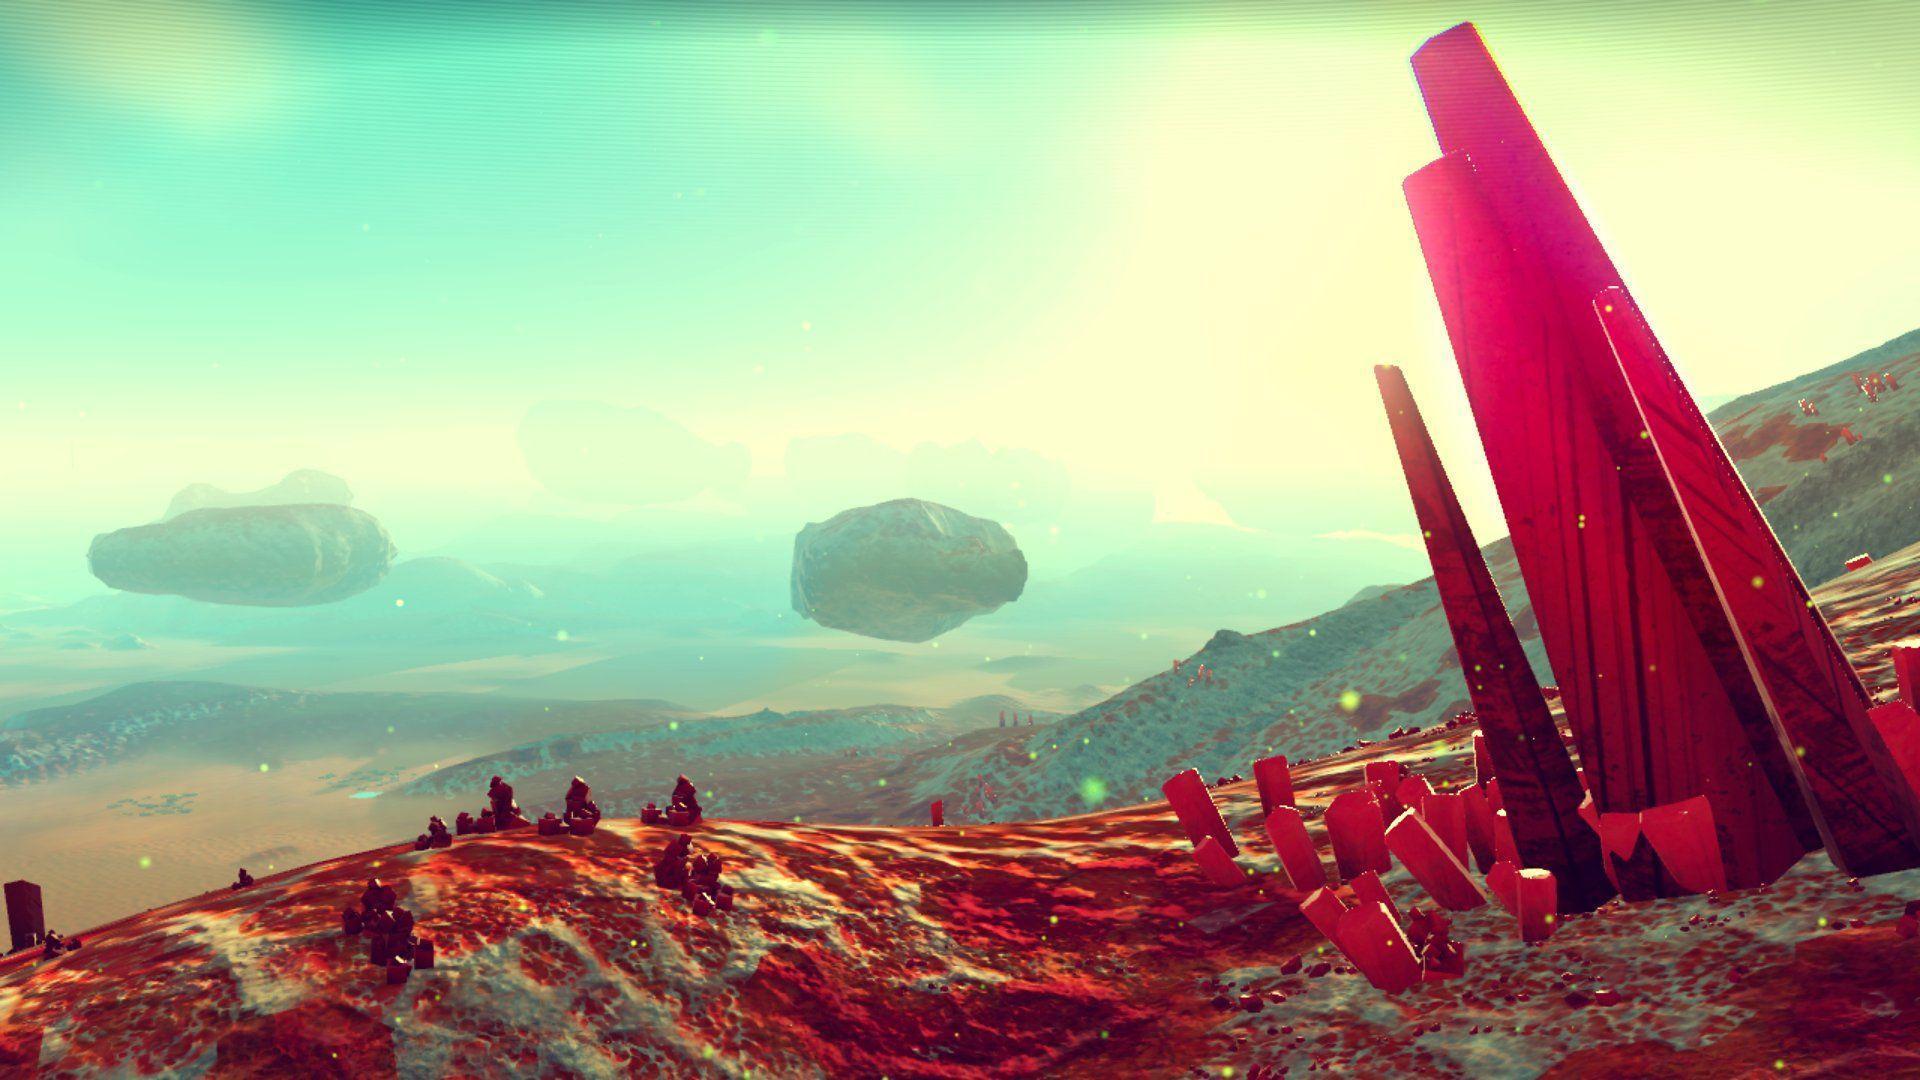 140 No Mans Sky HD Wallpapers and Backgrounds